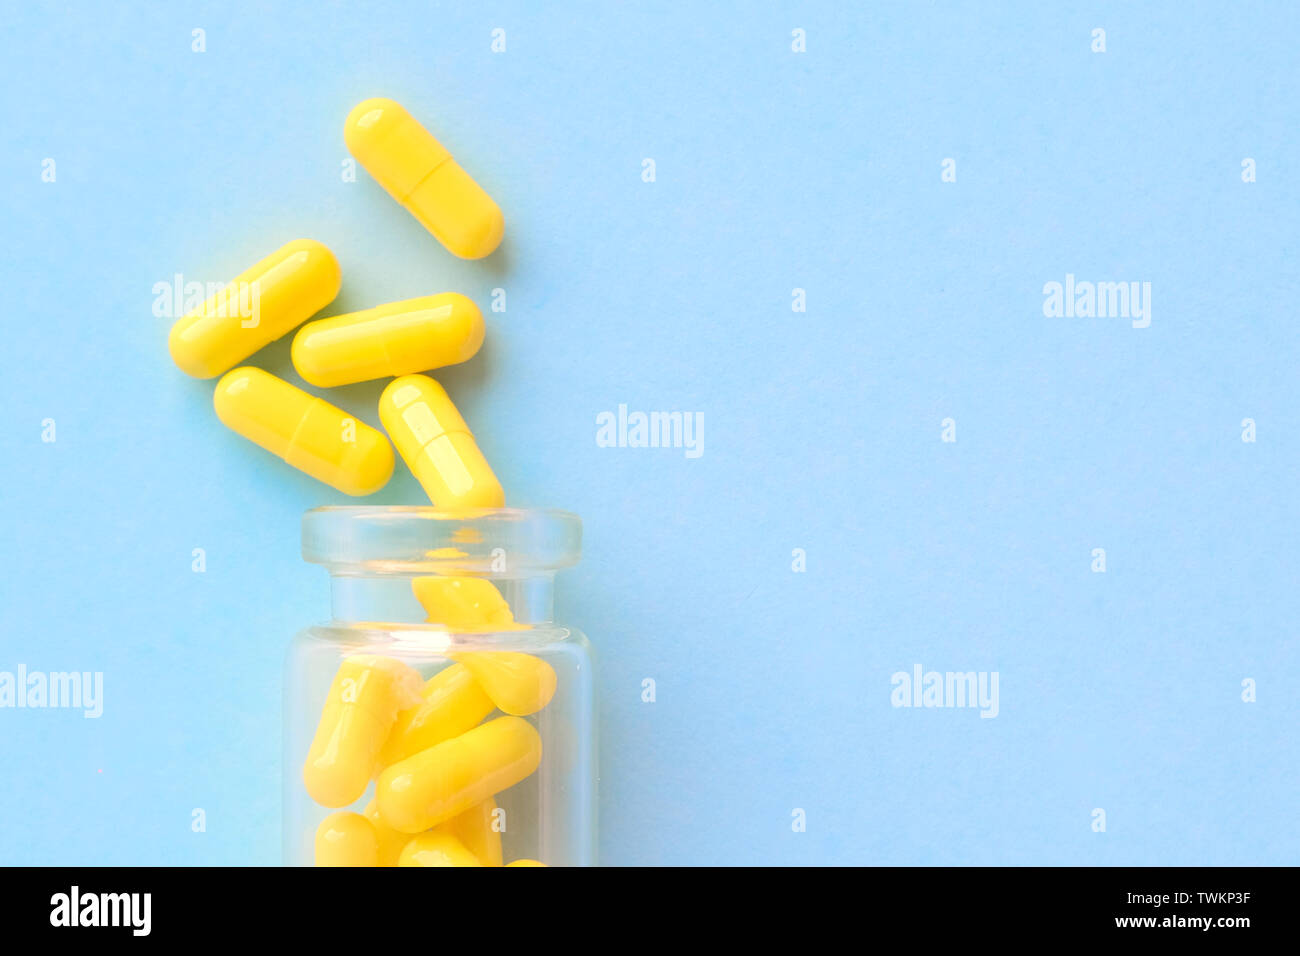 Yellow Capsules From Glass Bottle On Blue Background Copyspace For Text Epidemic Painkillers Healthcare Treatment Pills And Drug Abuse Concept Stock Photo Alamy